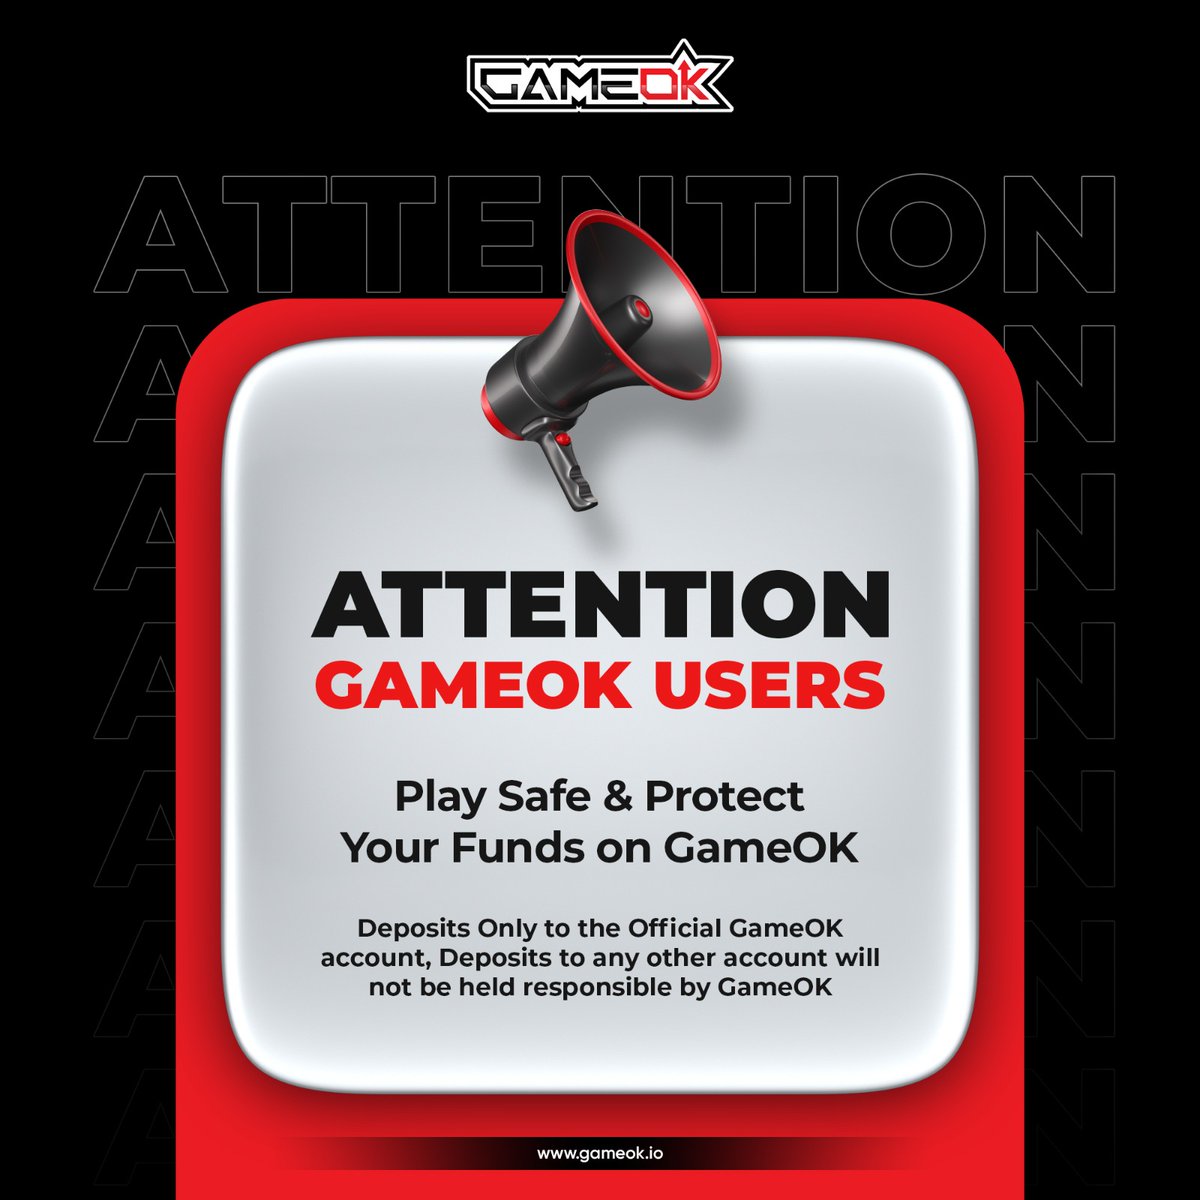 Attention GameOK Users

Play Safe & Protect Your Funds on GameOK
Deposits Only to the Official GameOK account, Deposits to any other account will not be held responsible by GameOK

#IPL #GameOK #CricketFever #EarnMoneyOnline #LiveCasino #onlinecasino #Attention #Warning